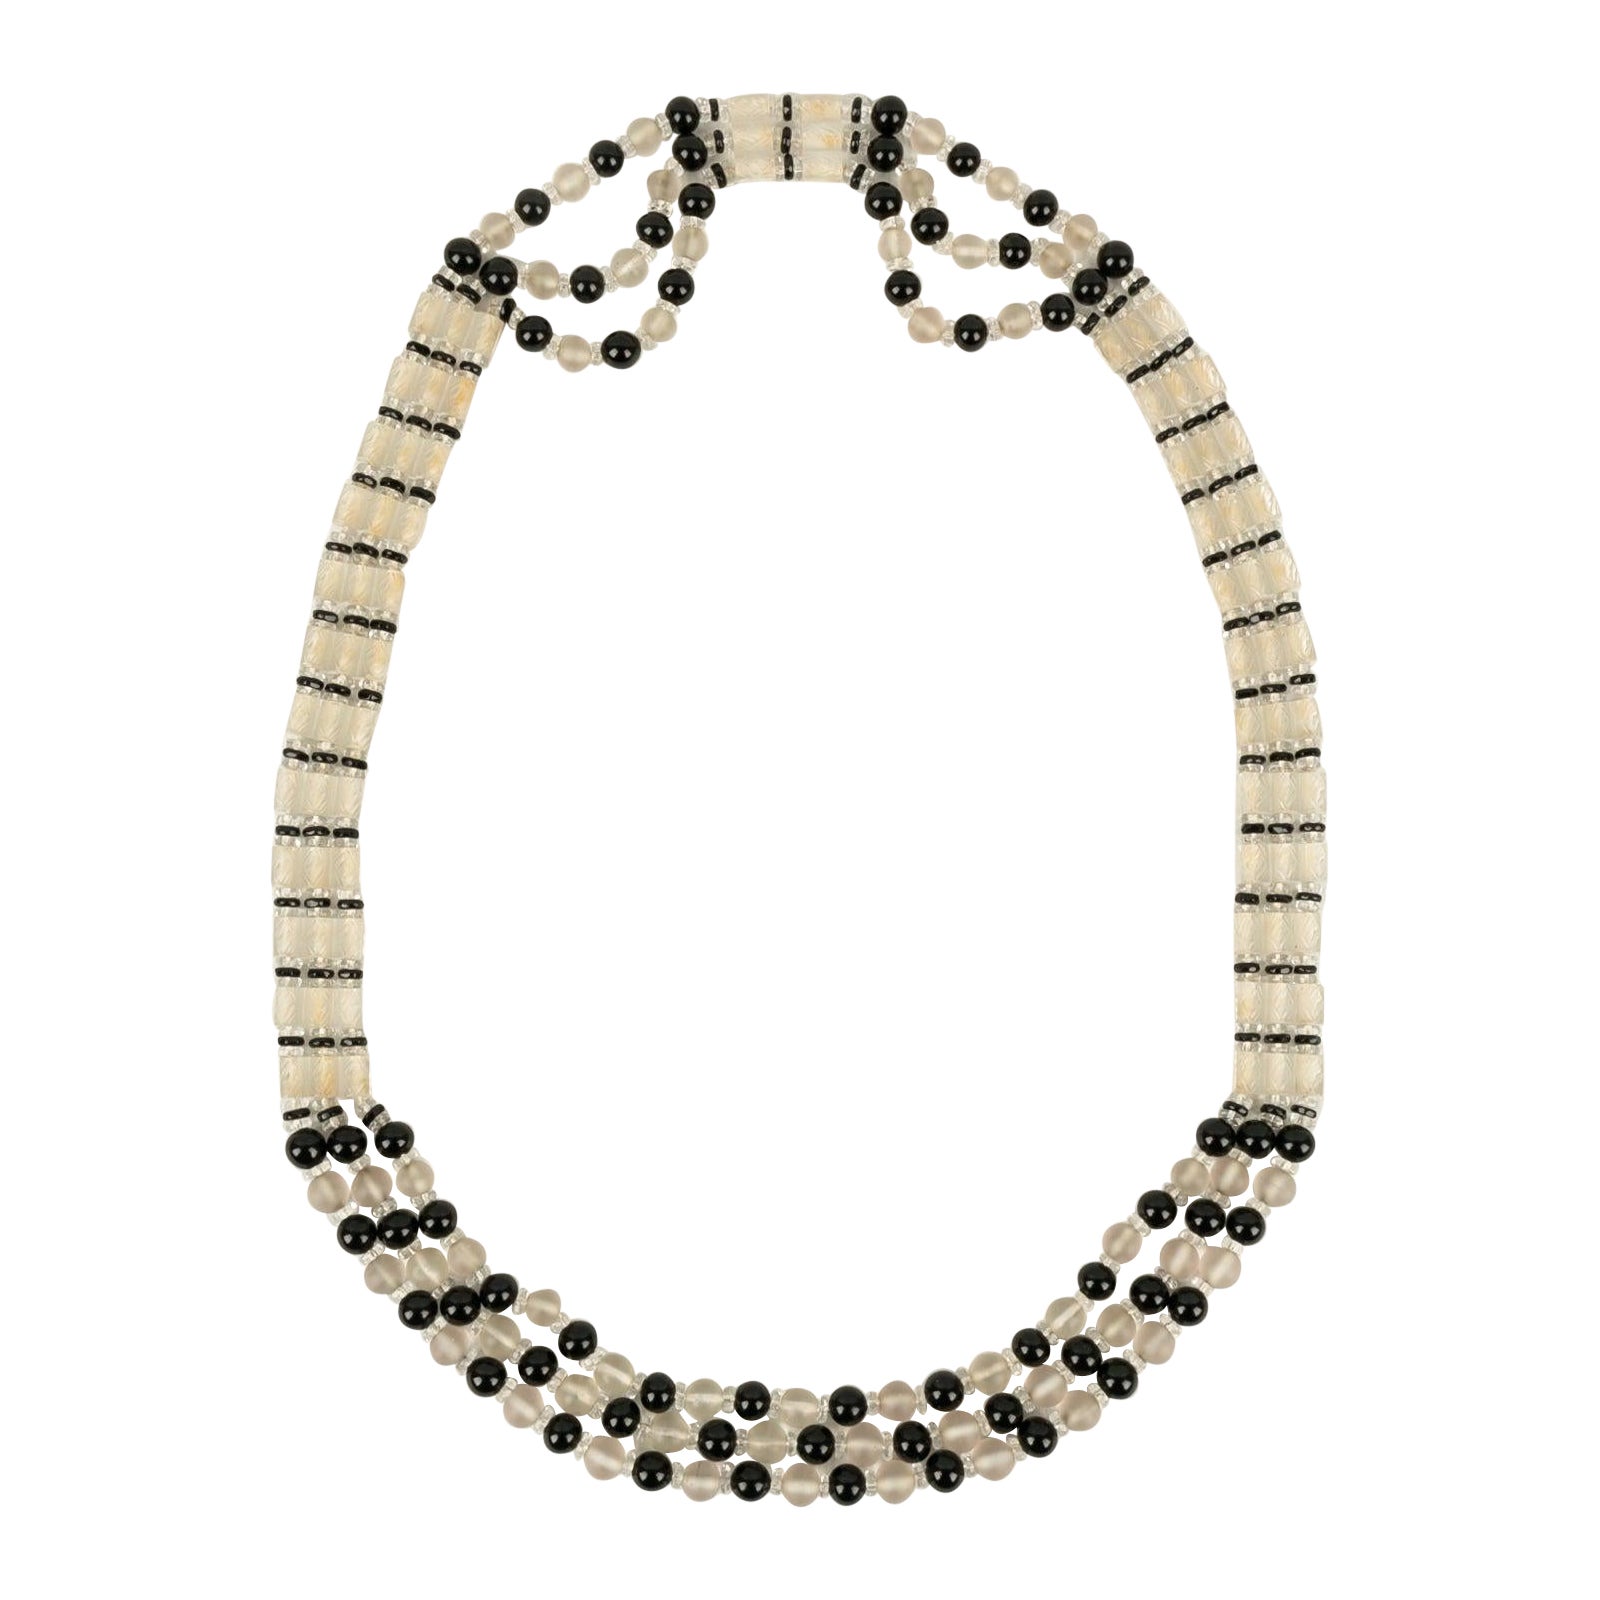 Rousselet Necklace in Transparent and Black Glass Pearls, 1920s For Sale